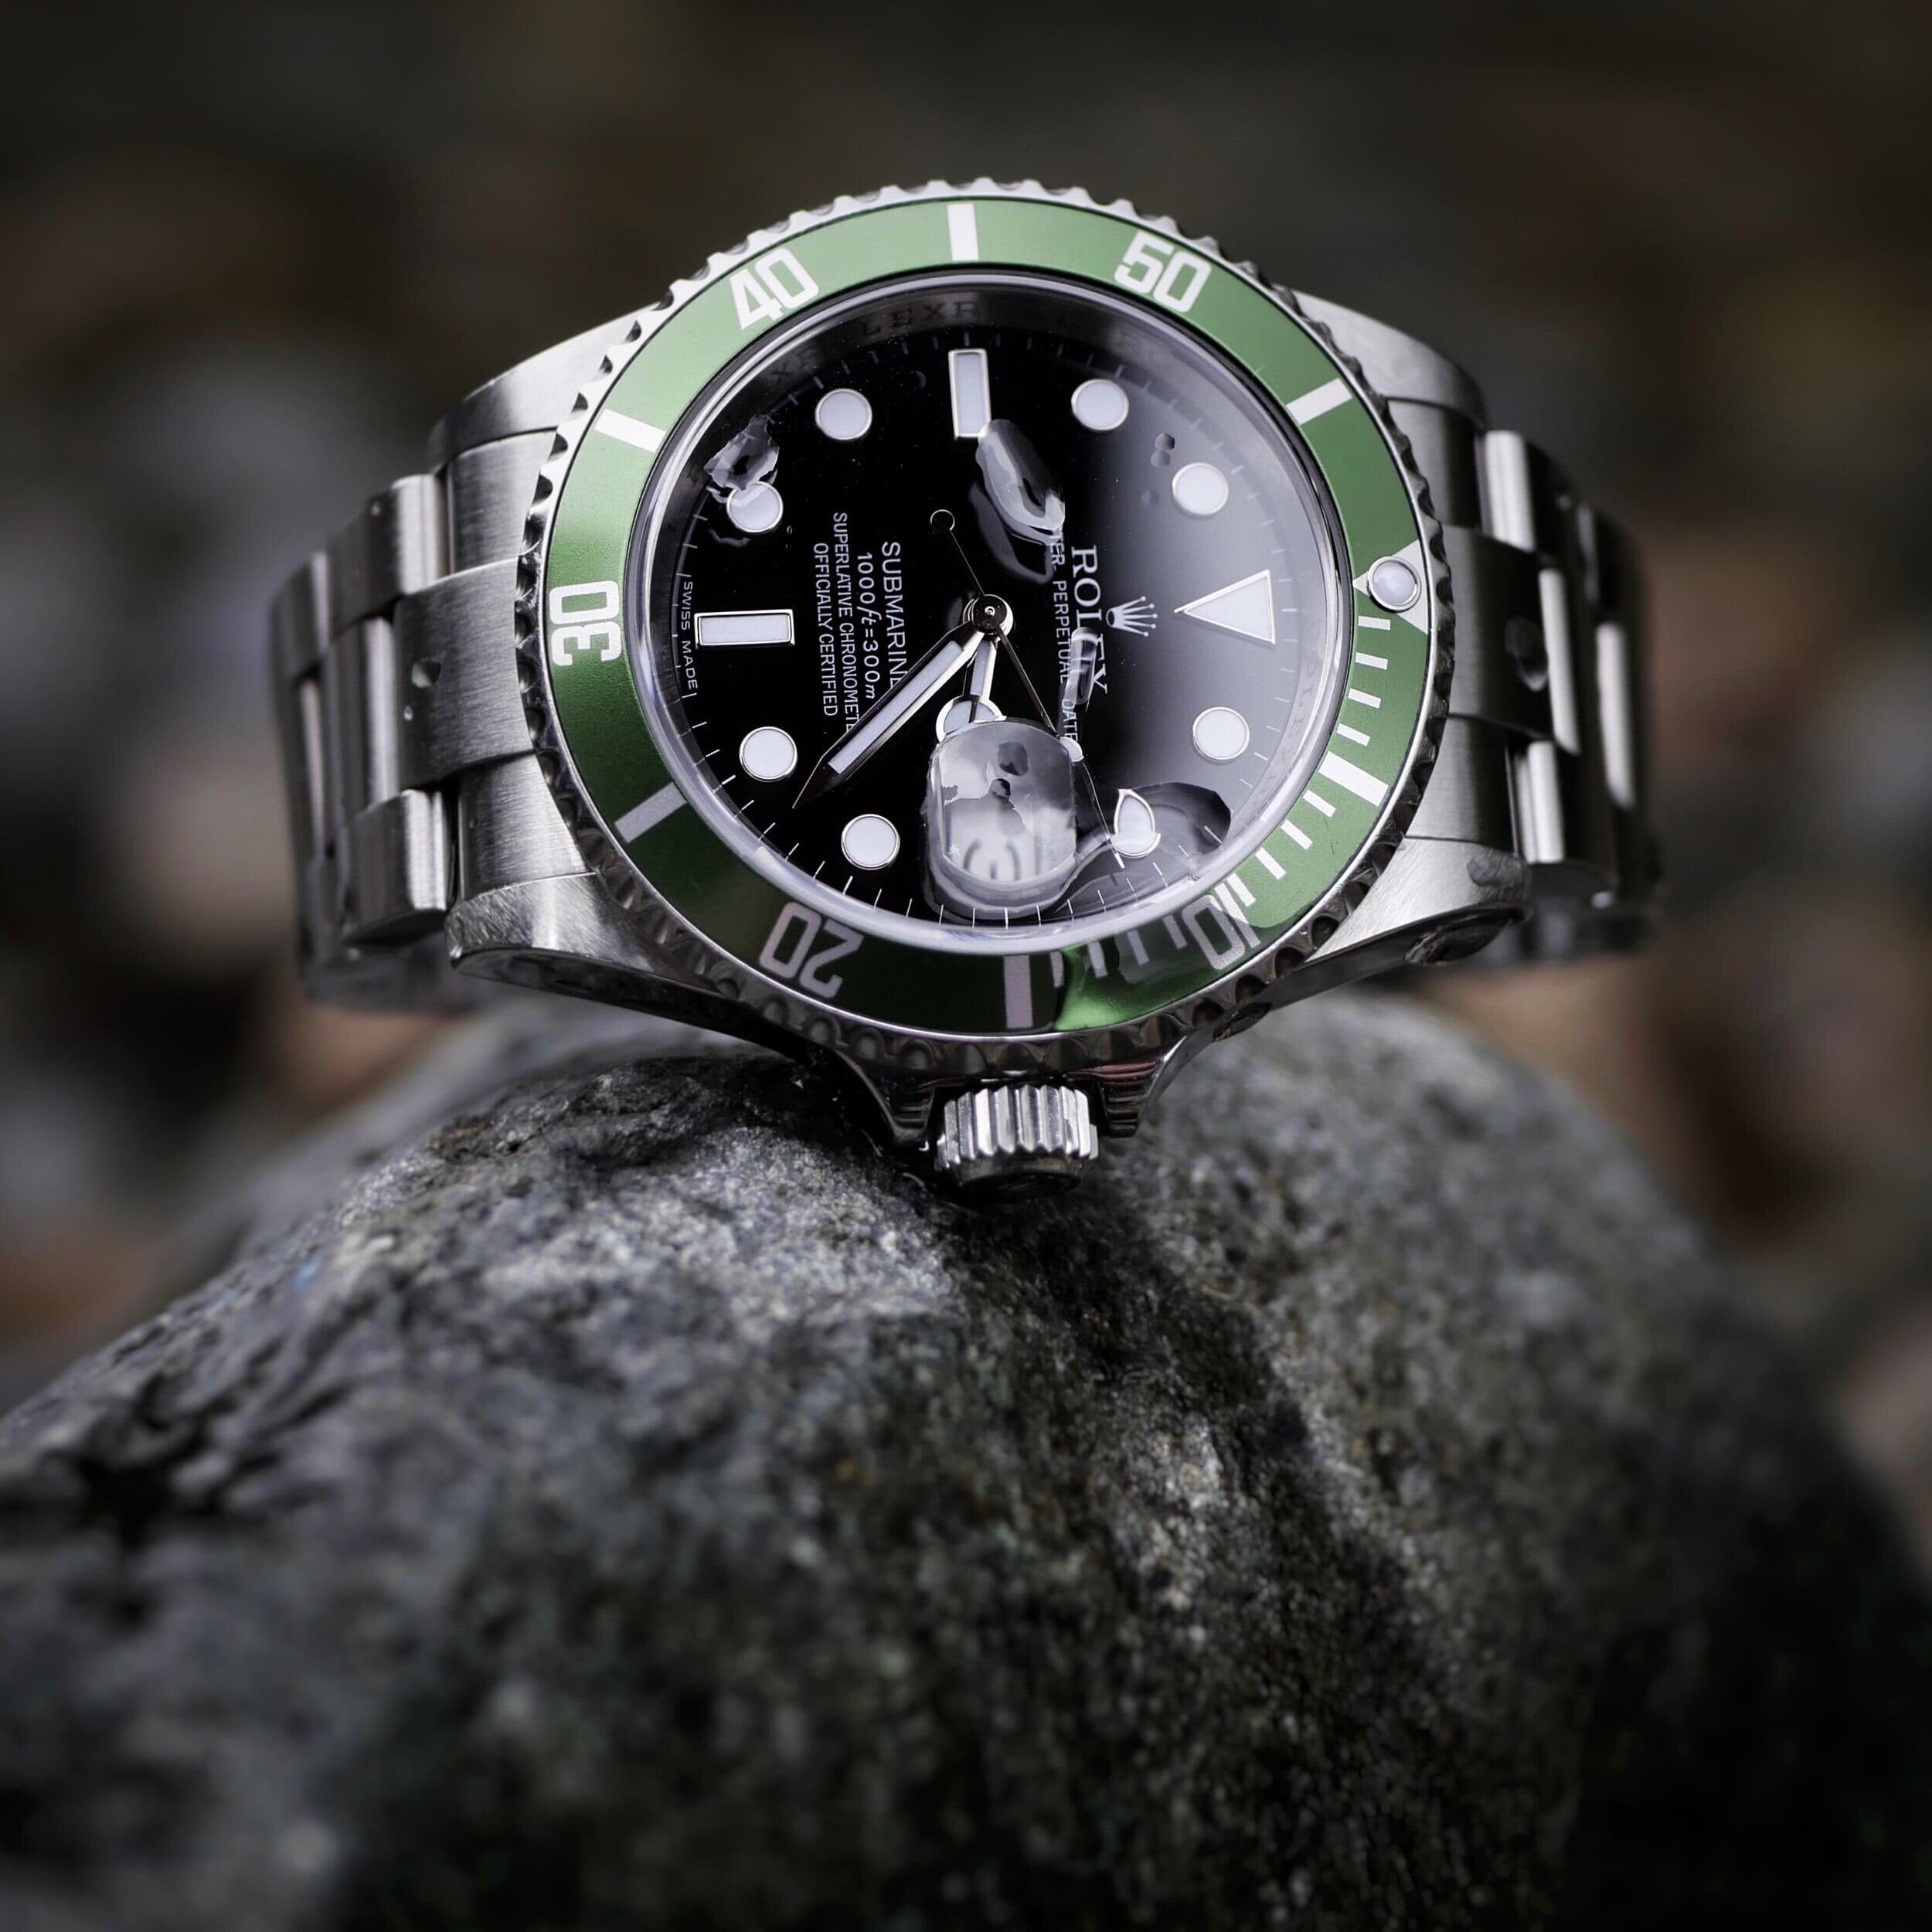 Rolex 16610LV Kermit Watch Review: Is It the Best Green Submariner on ...